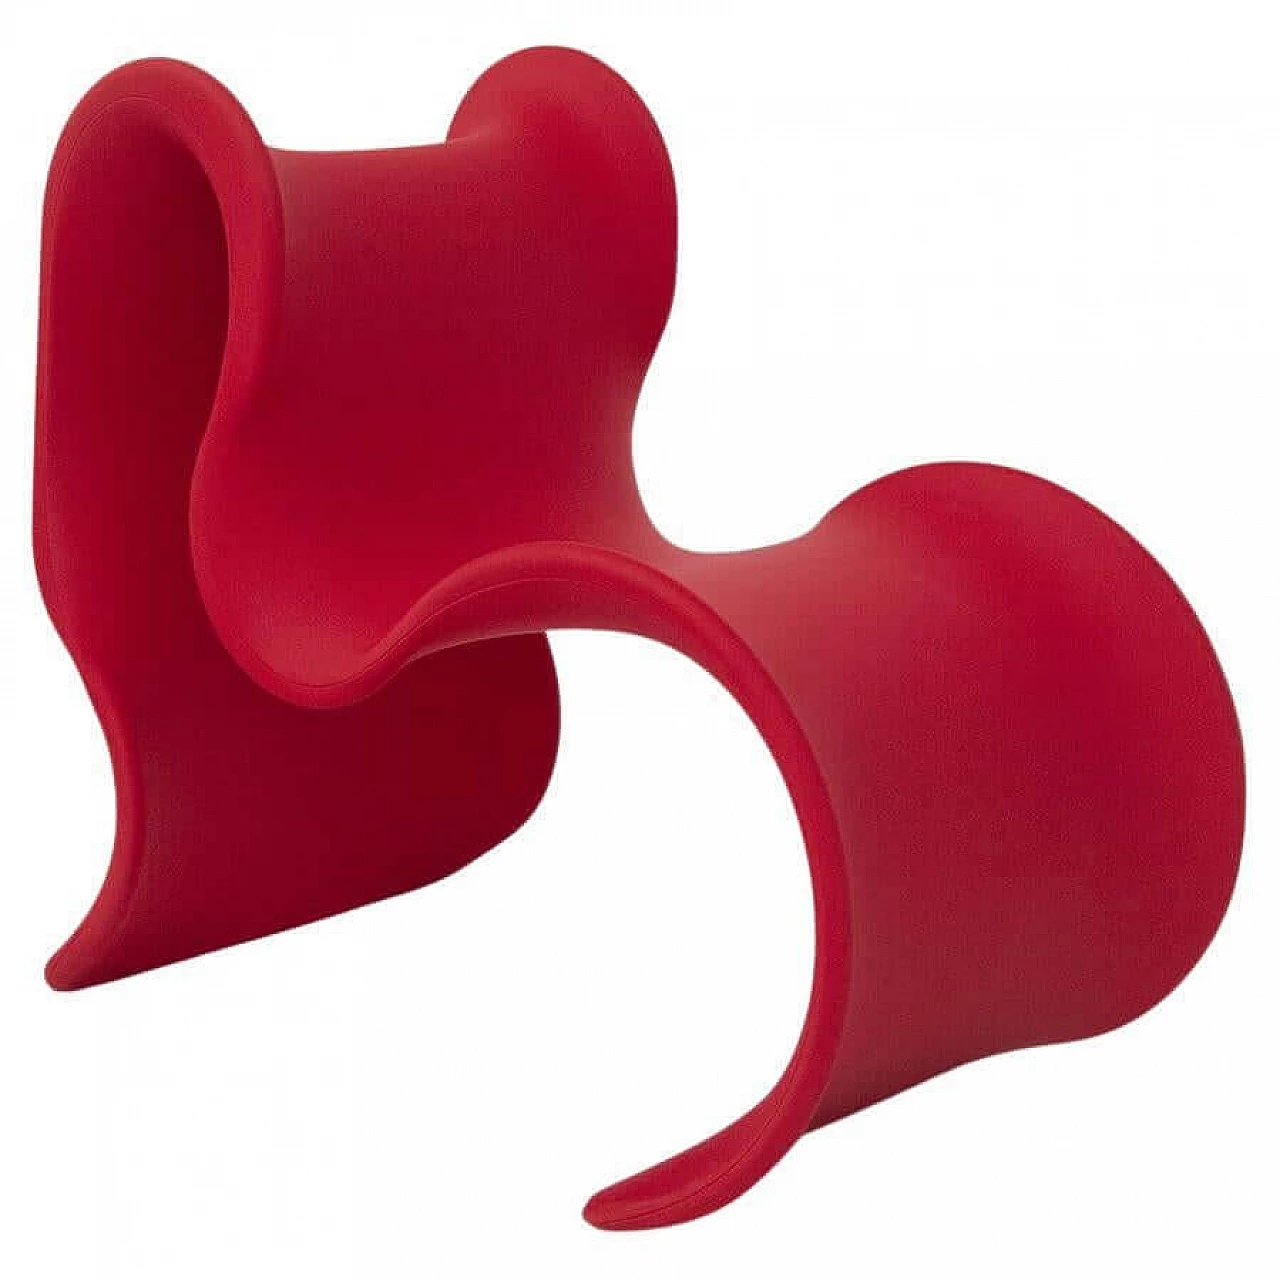 Fiocco armchair by Gianni Pareschi for Busnelli, 1970s 1467115